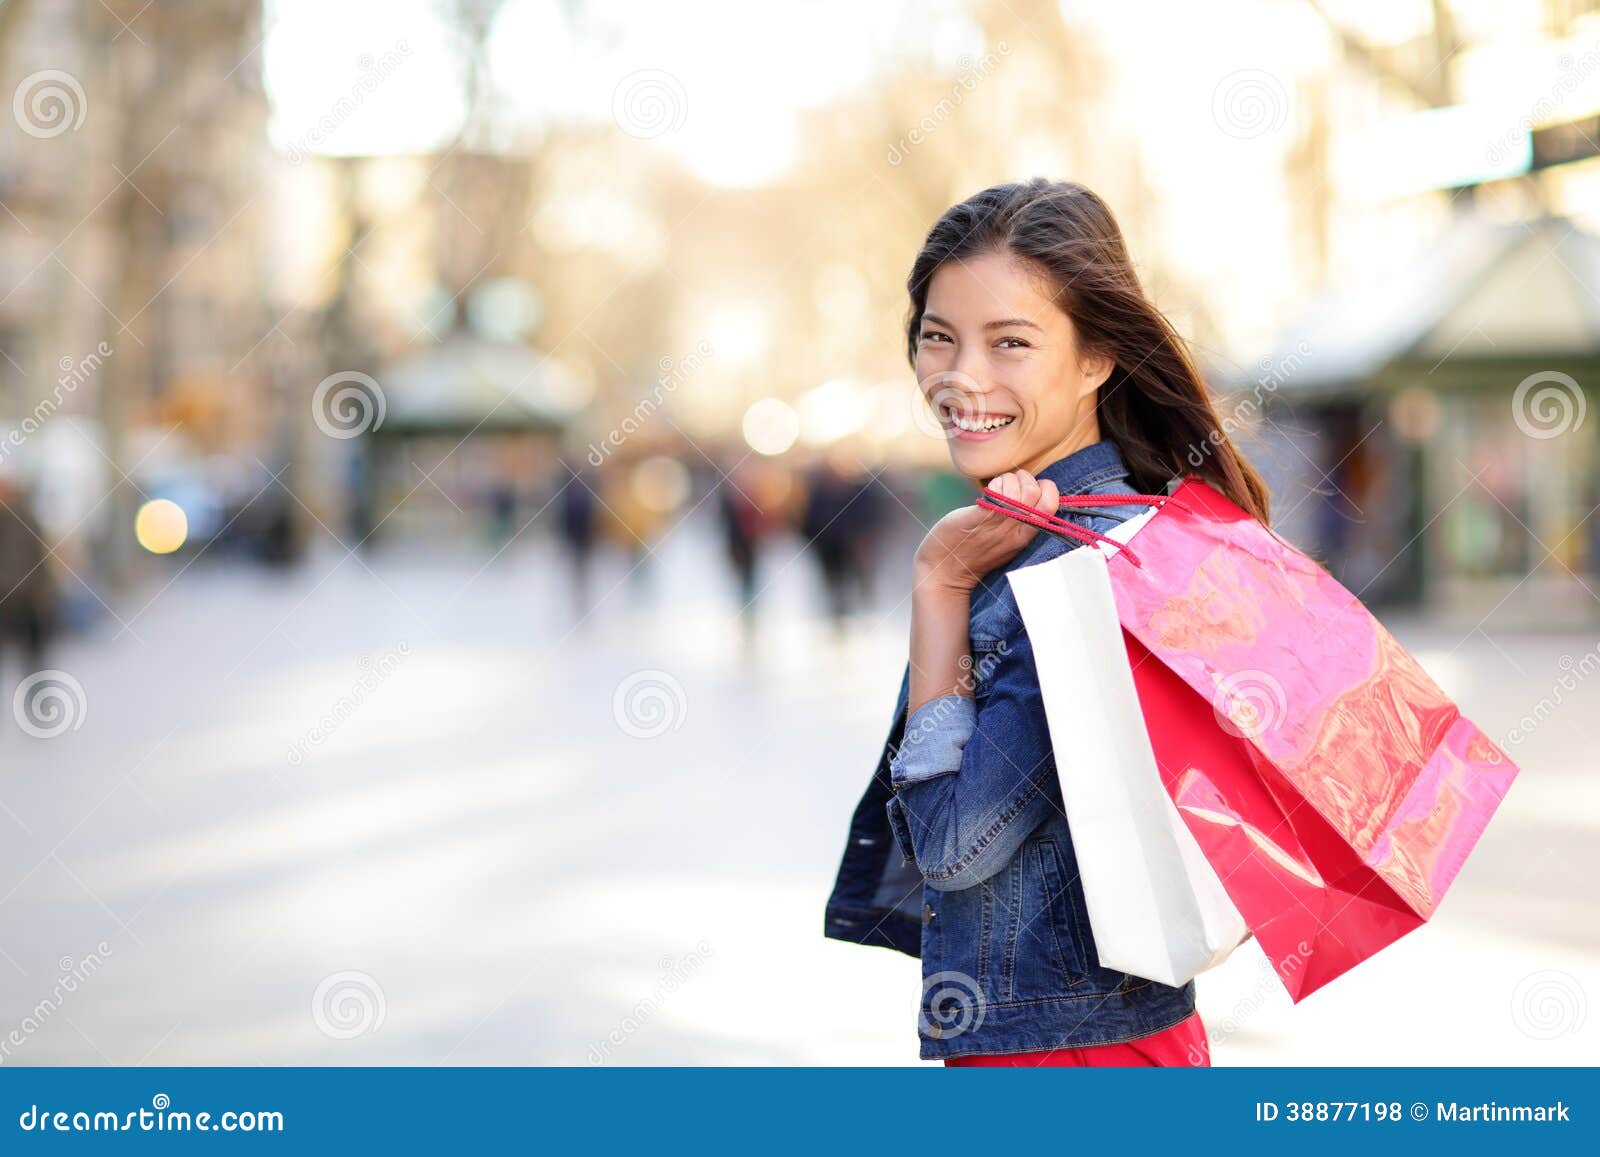 Shopping Woman Barcelona Spain Stock Photo - Download Image Now